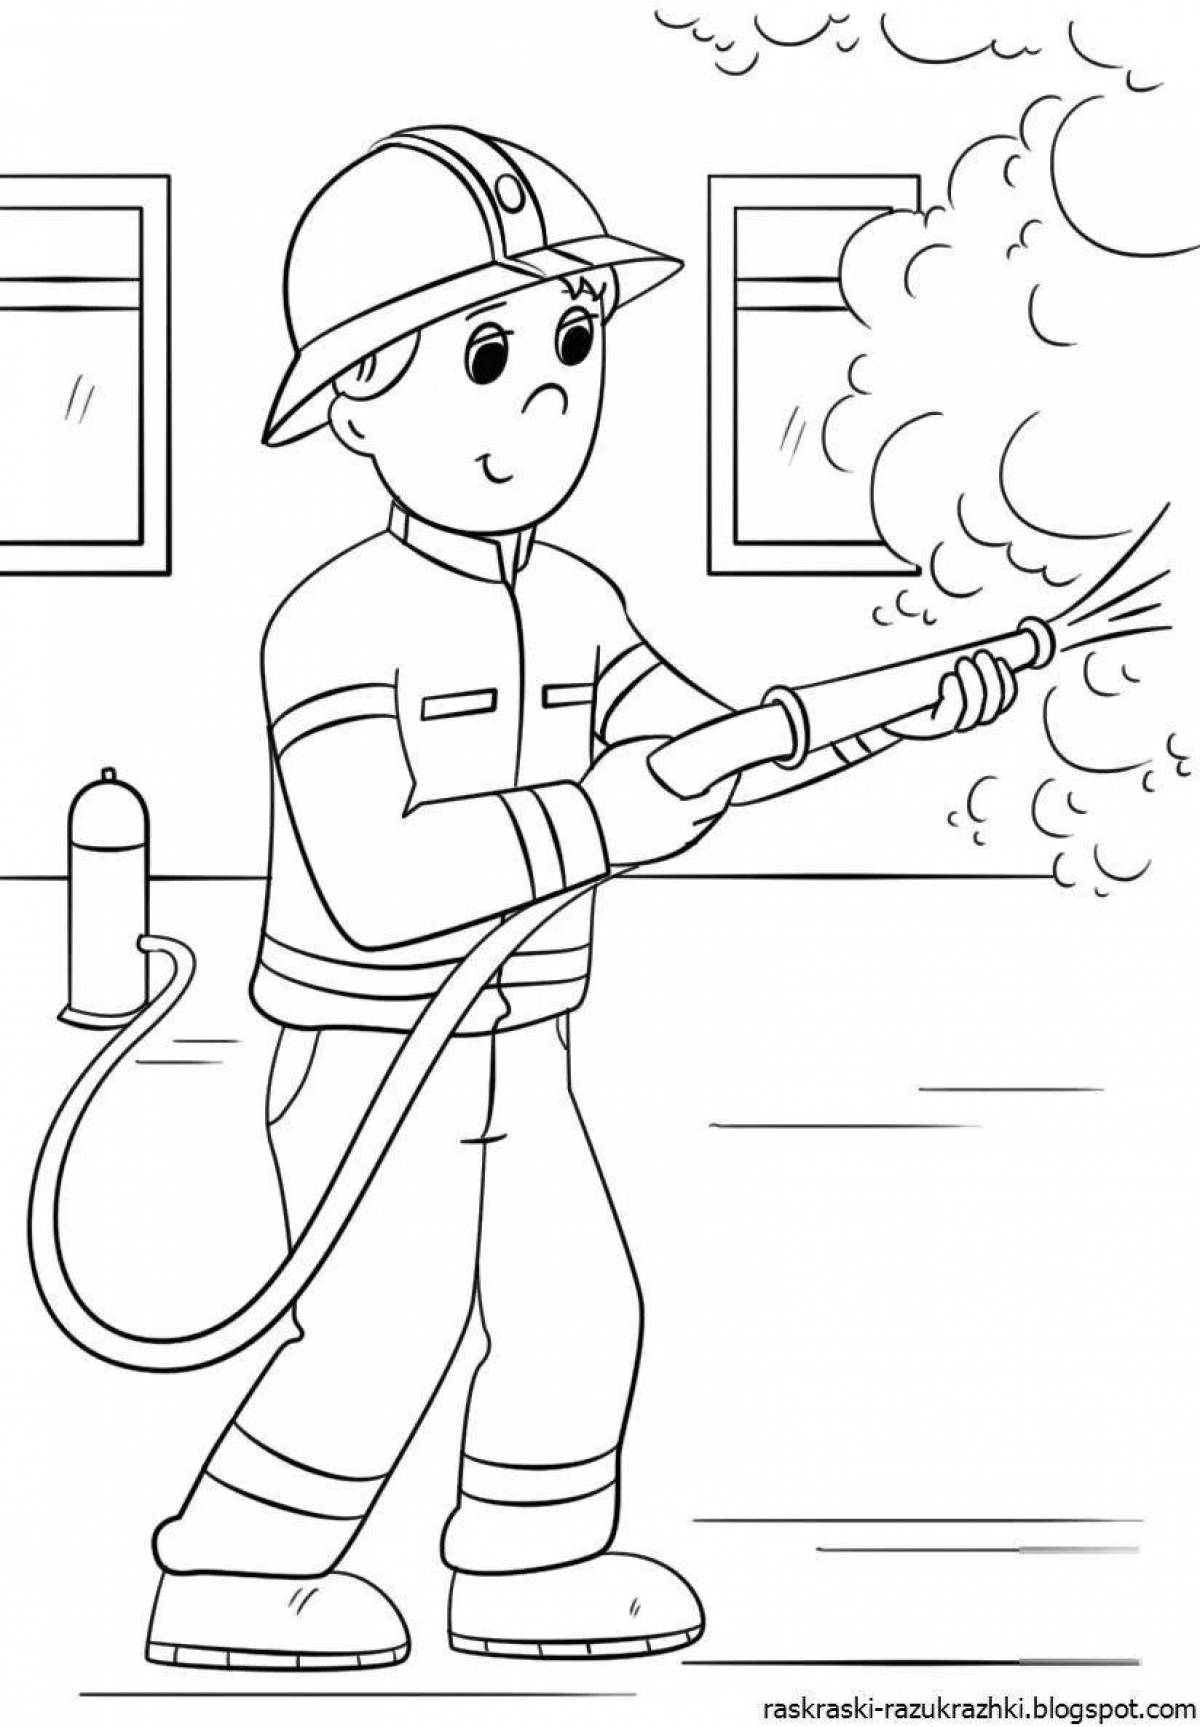 Fireman coloring book for kids